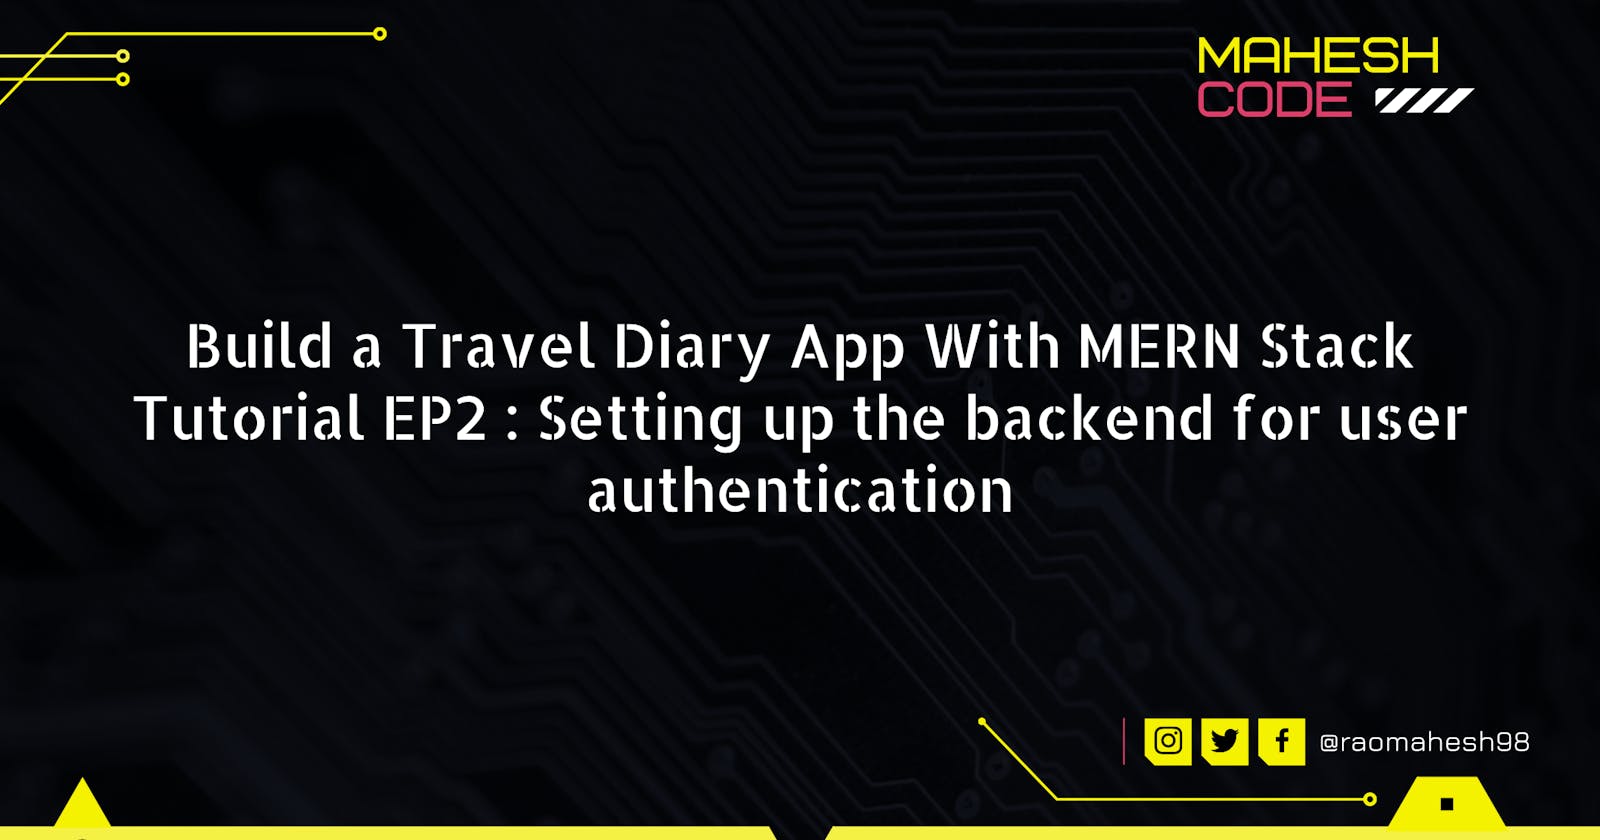 Build a Travel Diary App With MERN Stack Tutorial EP2 : Setting up the backend for user authentication